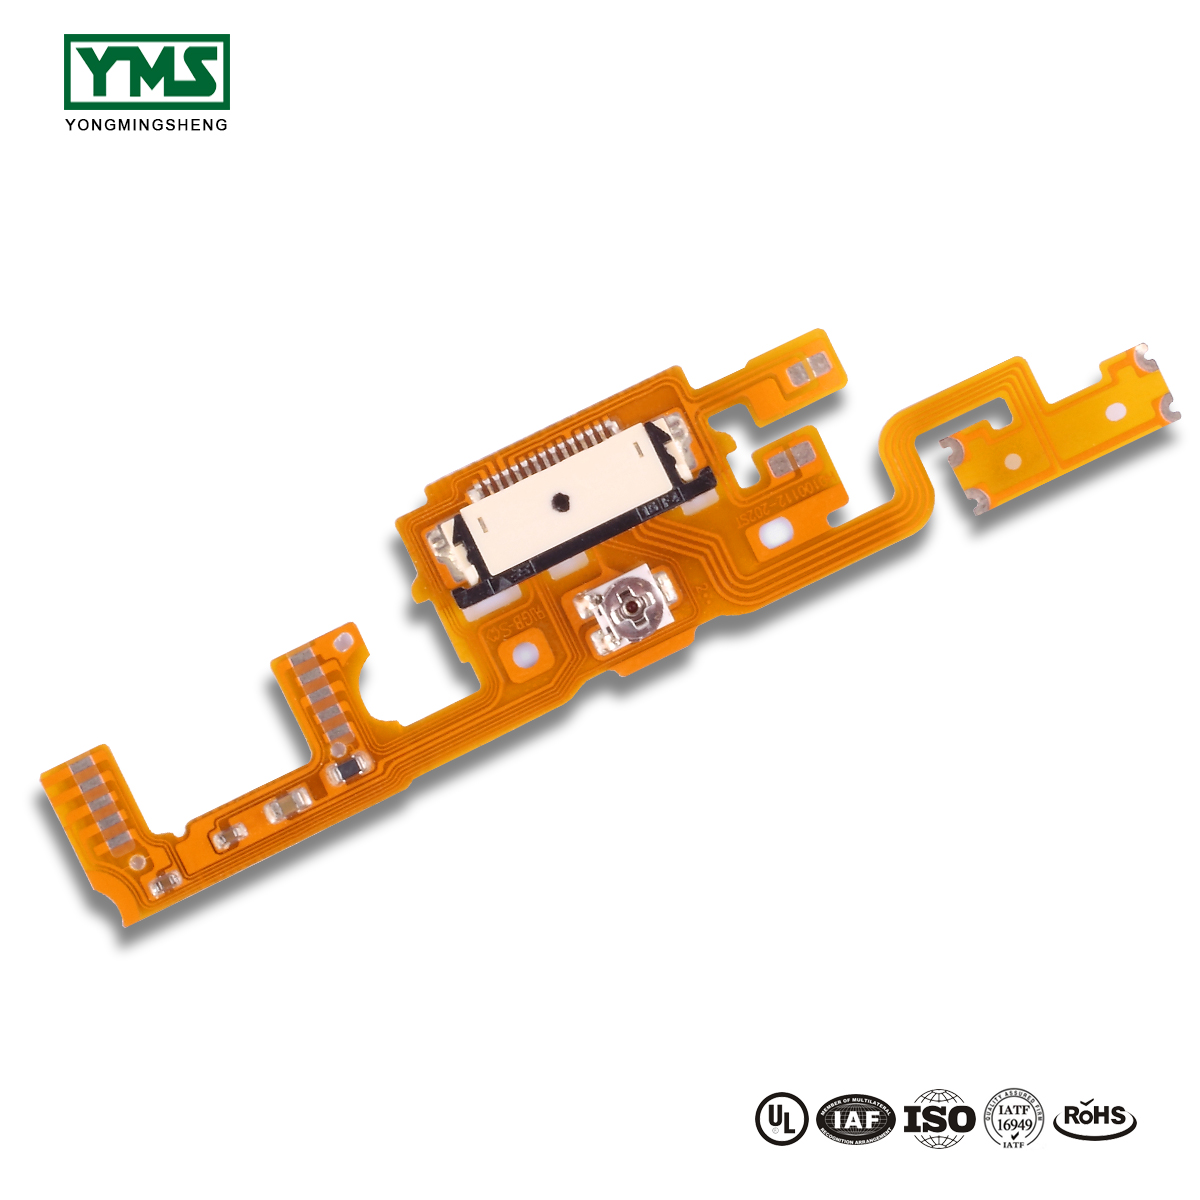 New Delivery for Led Printed Circuit Board - 1Layer Flexible Board | YMSPCB – Yongmingsheng